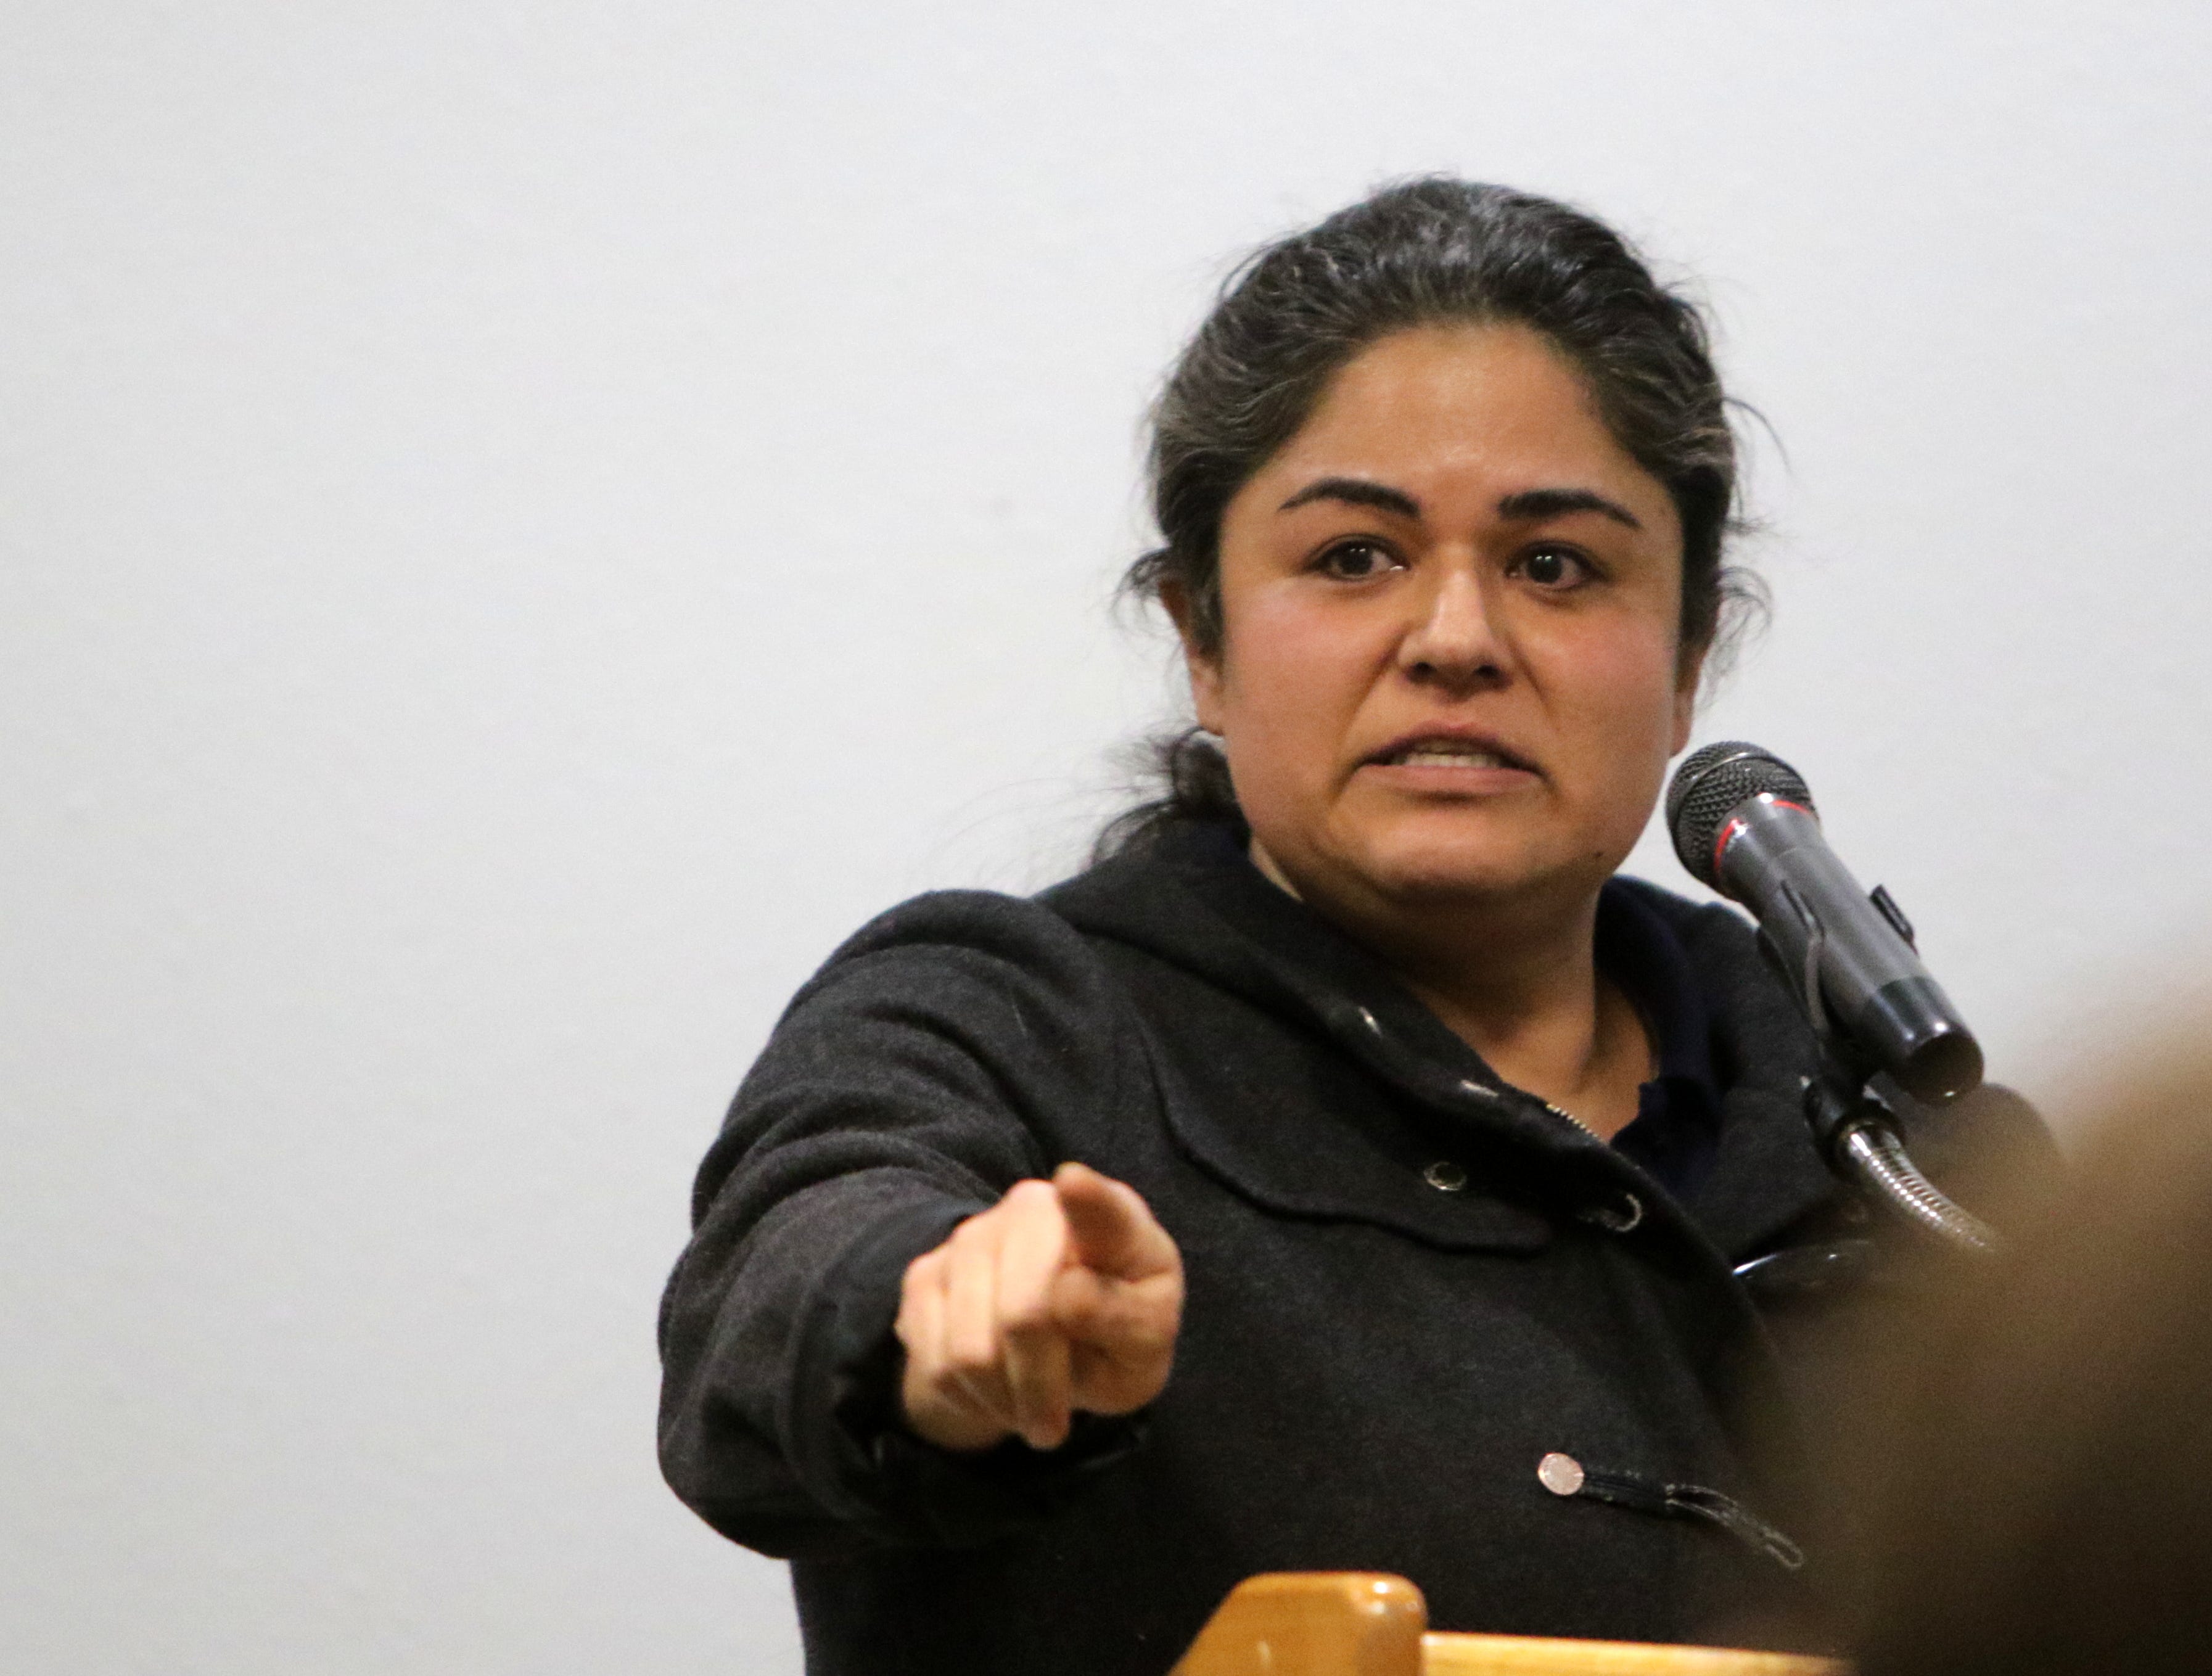 PNM employee Geneva Griego speaks, Monday, Jan. 6, 2020, during a public hearing hosted by the New Mexico Public Regulation Commission at San Juan College regarding the future of the San Juan Generating Station.